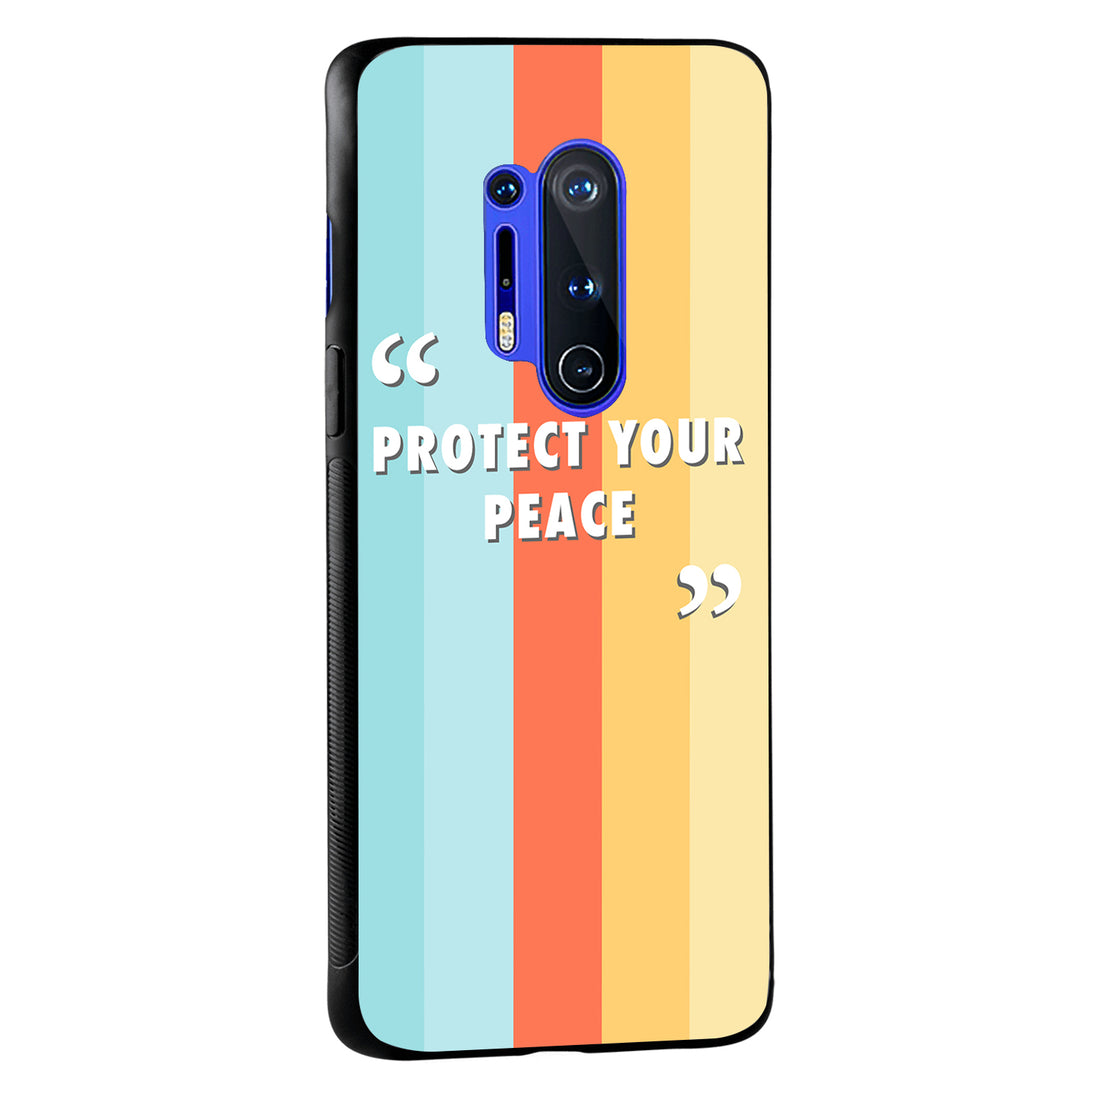 Protect your peace Motivational Quotes Oneplus 8 Pro Back Case